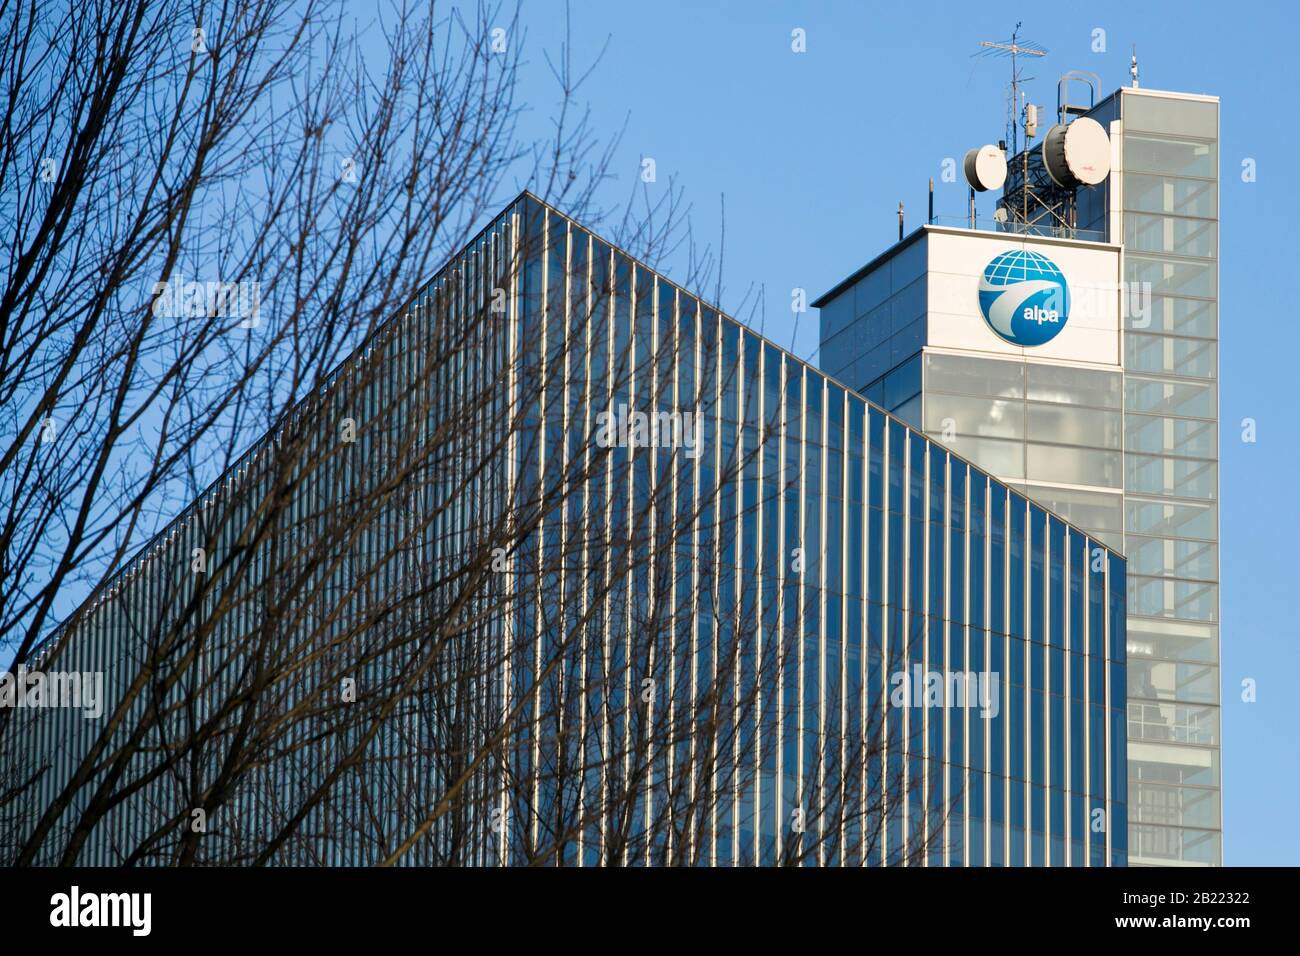 A logo sign outside of the headquarters of The Air Line Pilots Association (ALPA) in Tysons, Virginia, on February 23, 2020. Stock Photo